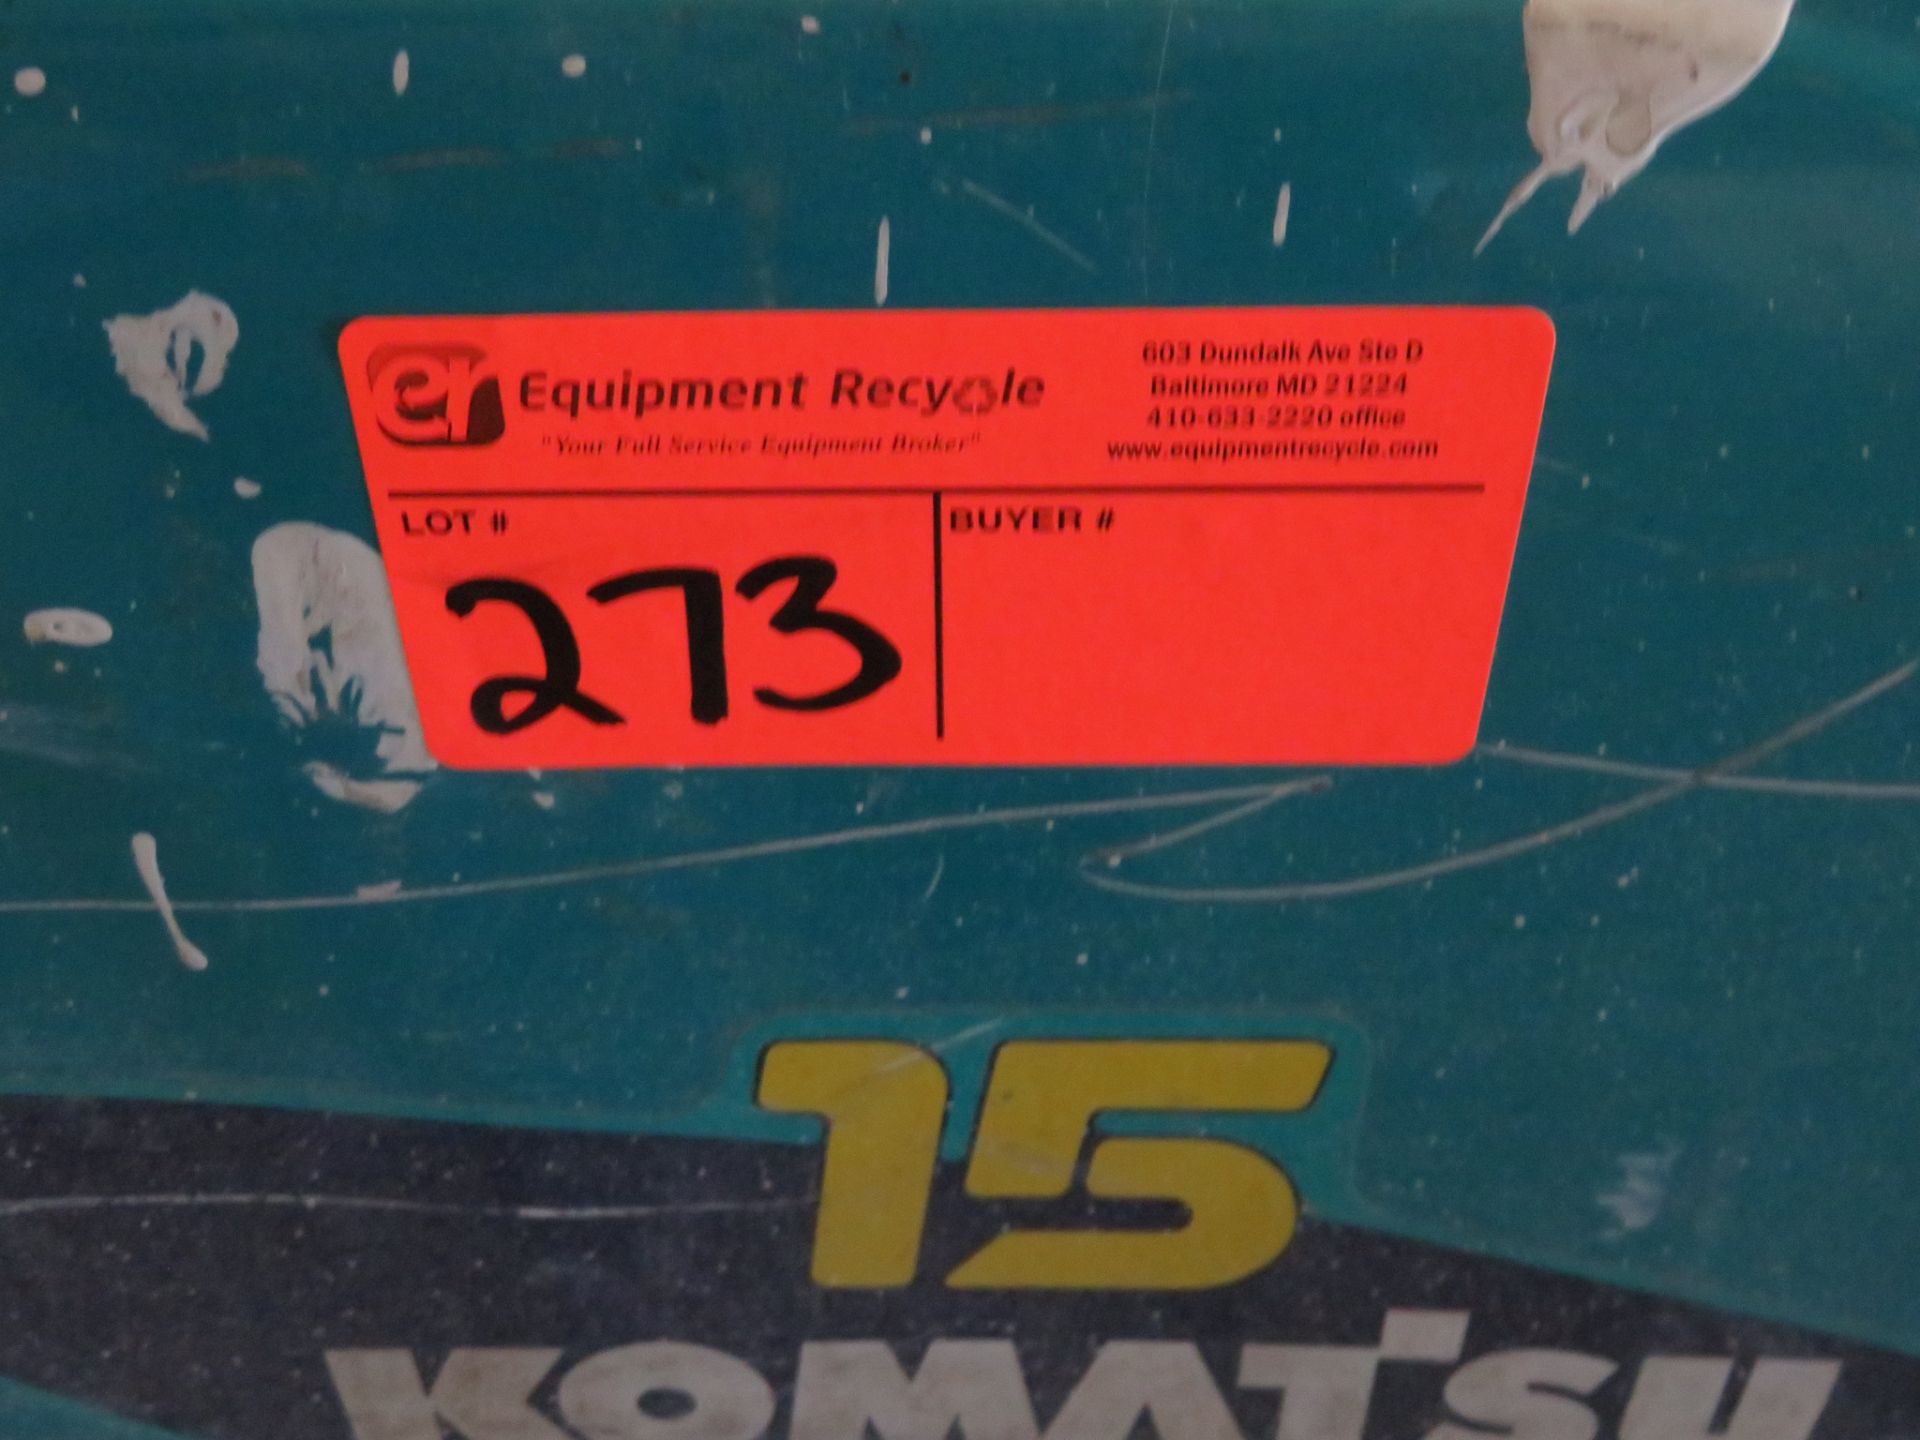 Komat'su Propane Forklift 2600lbs FG15HT-16 Late removal of October 29th - Image 7 of 7